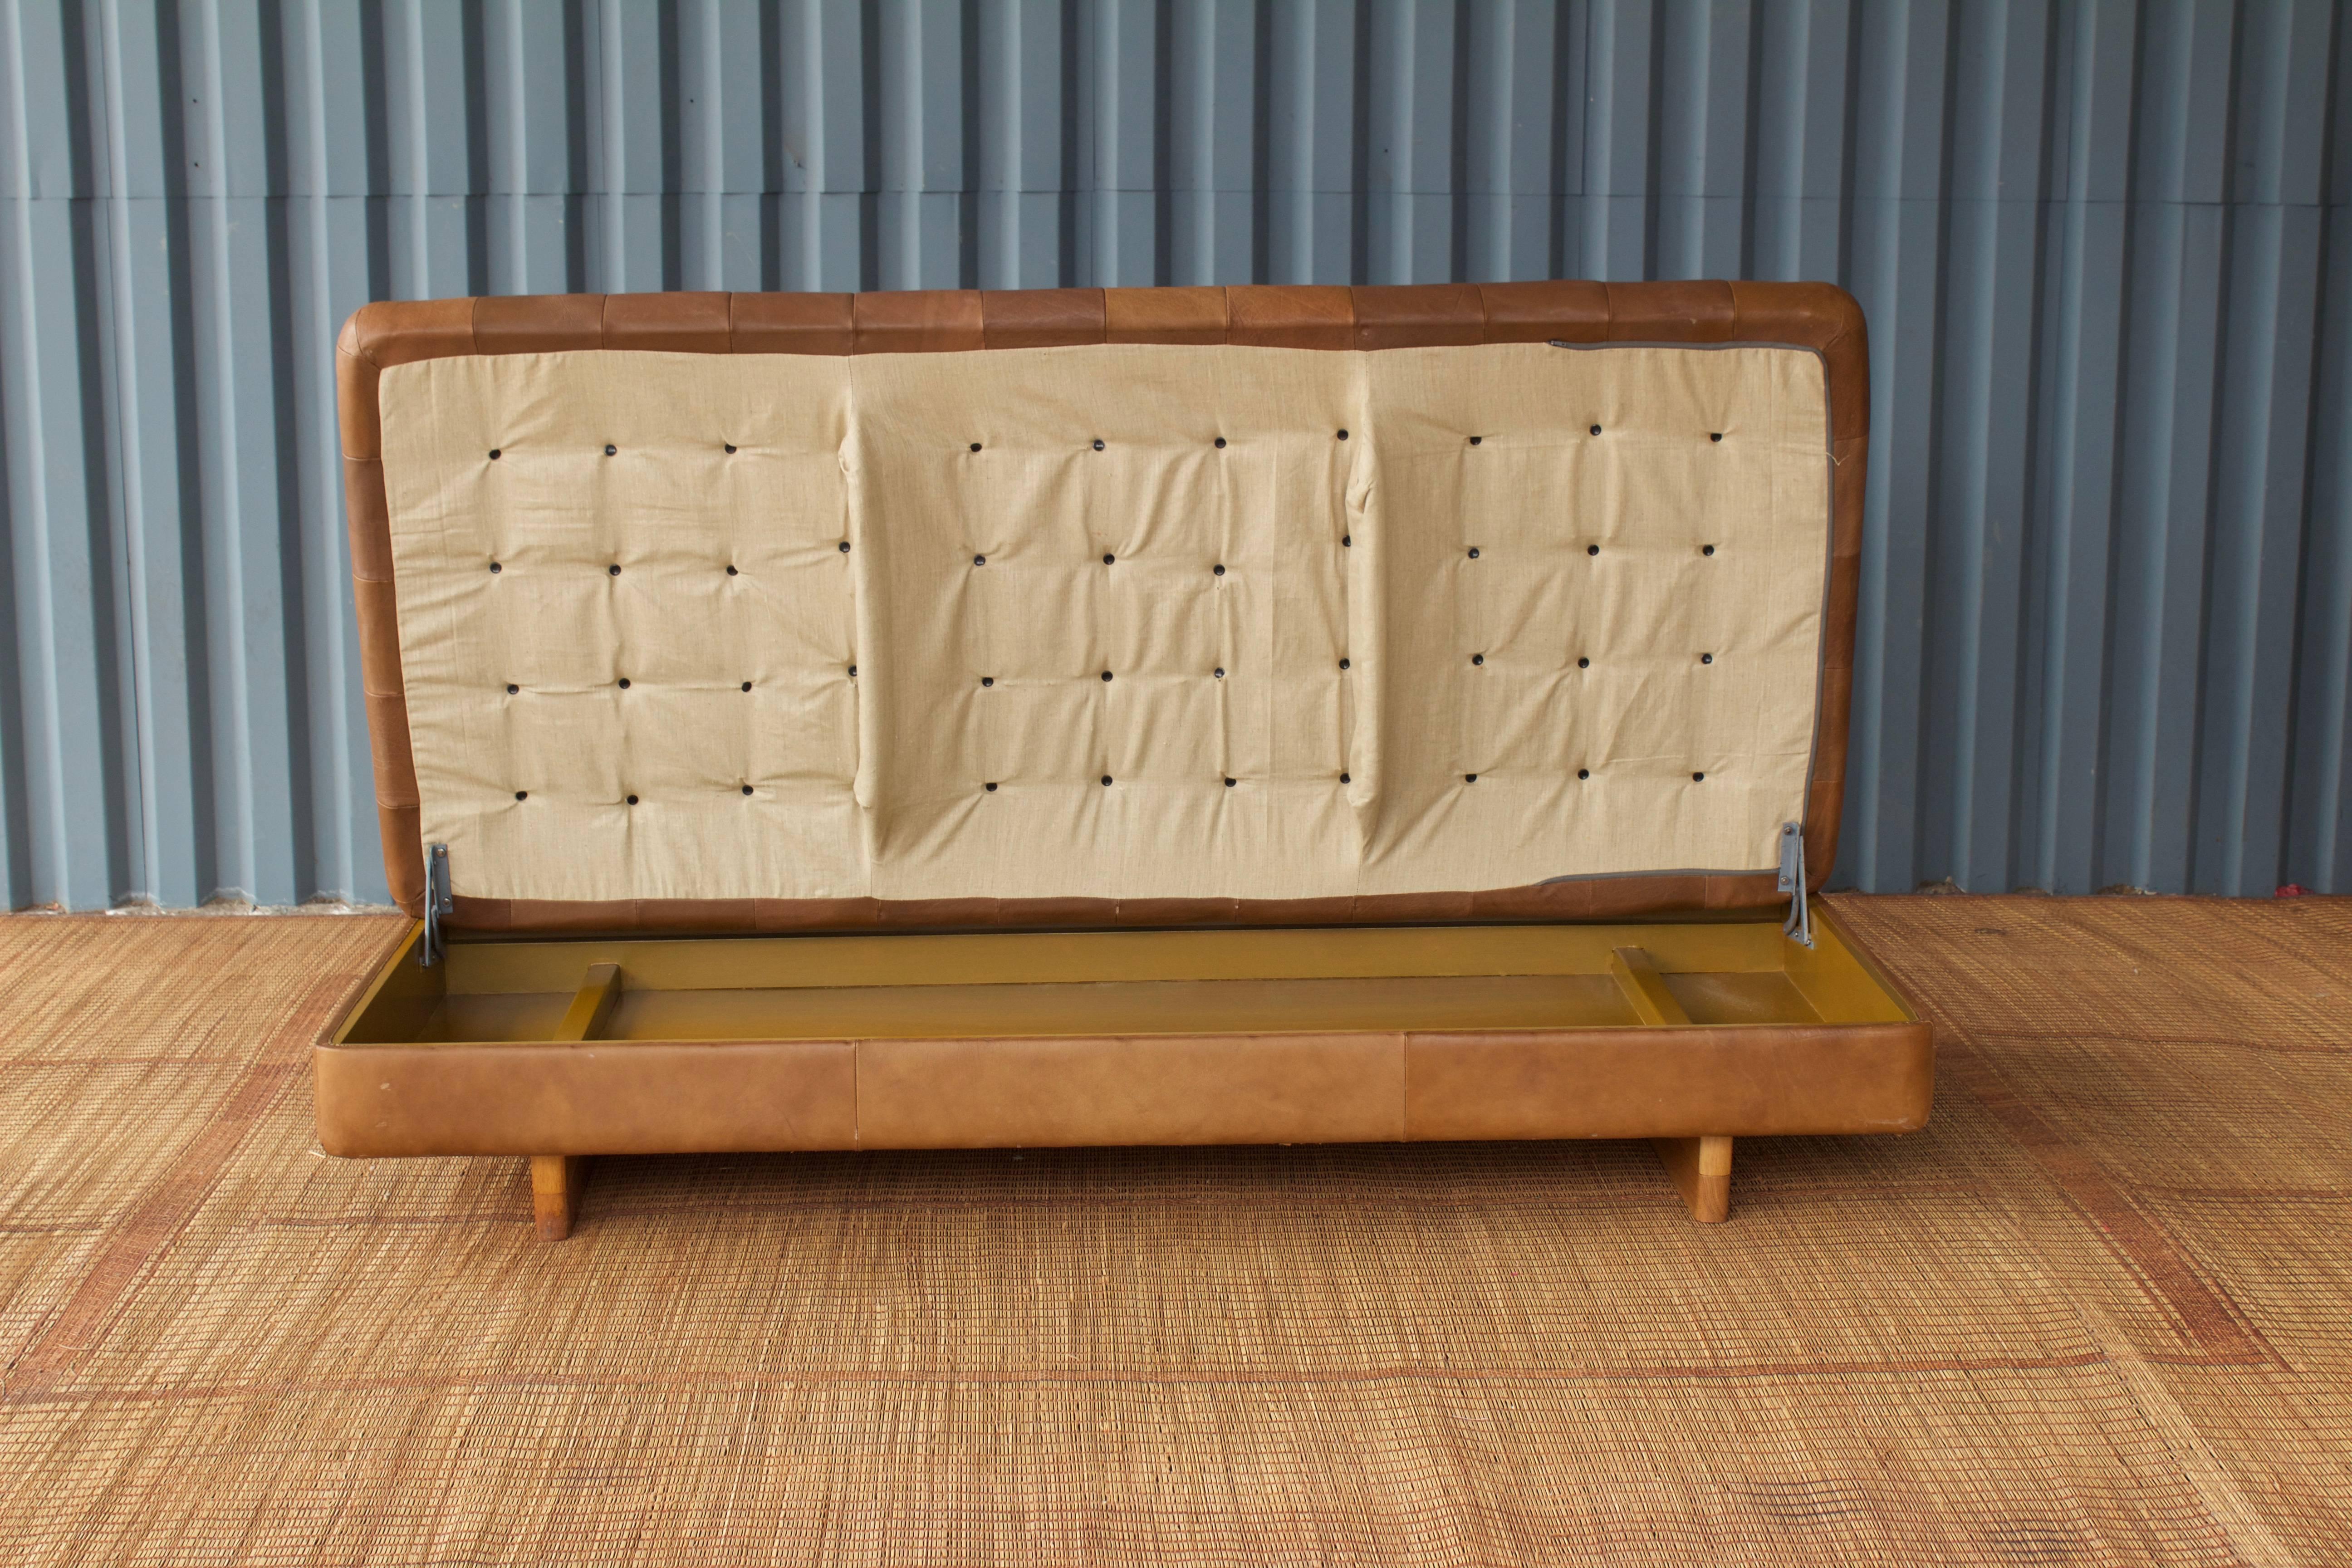 CHIC De Sede biscuit tufted storage ottoman with a handsome low profile. Easy lifting to access storage with stained wood interior. Special piece! Original, broken in leather.